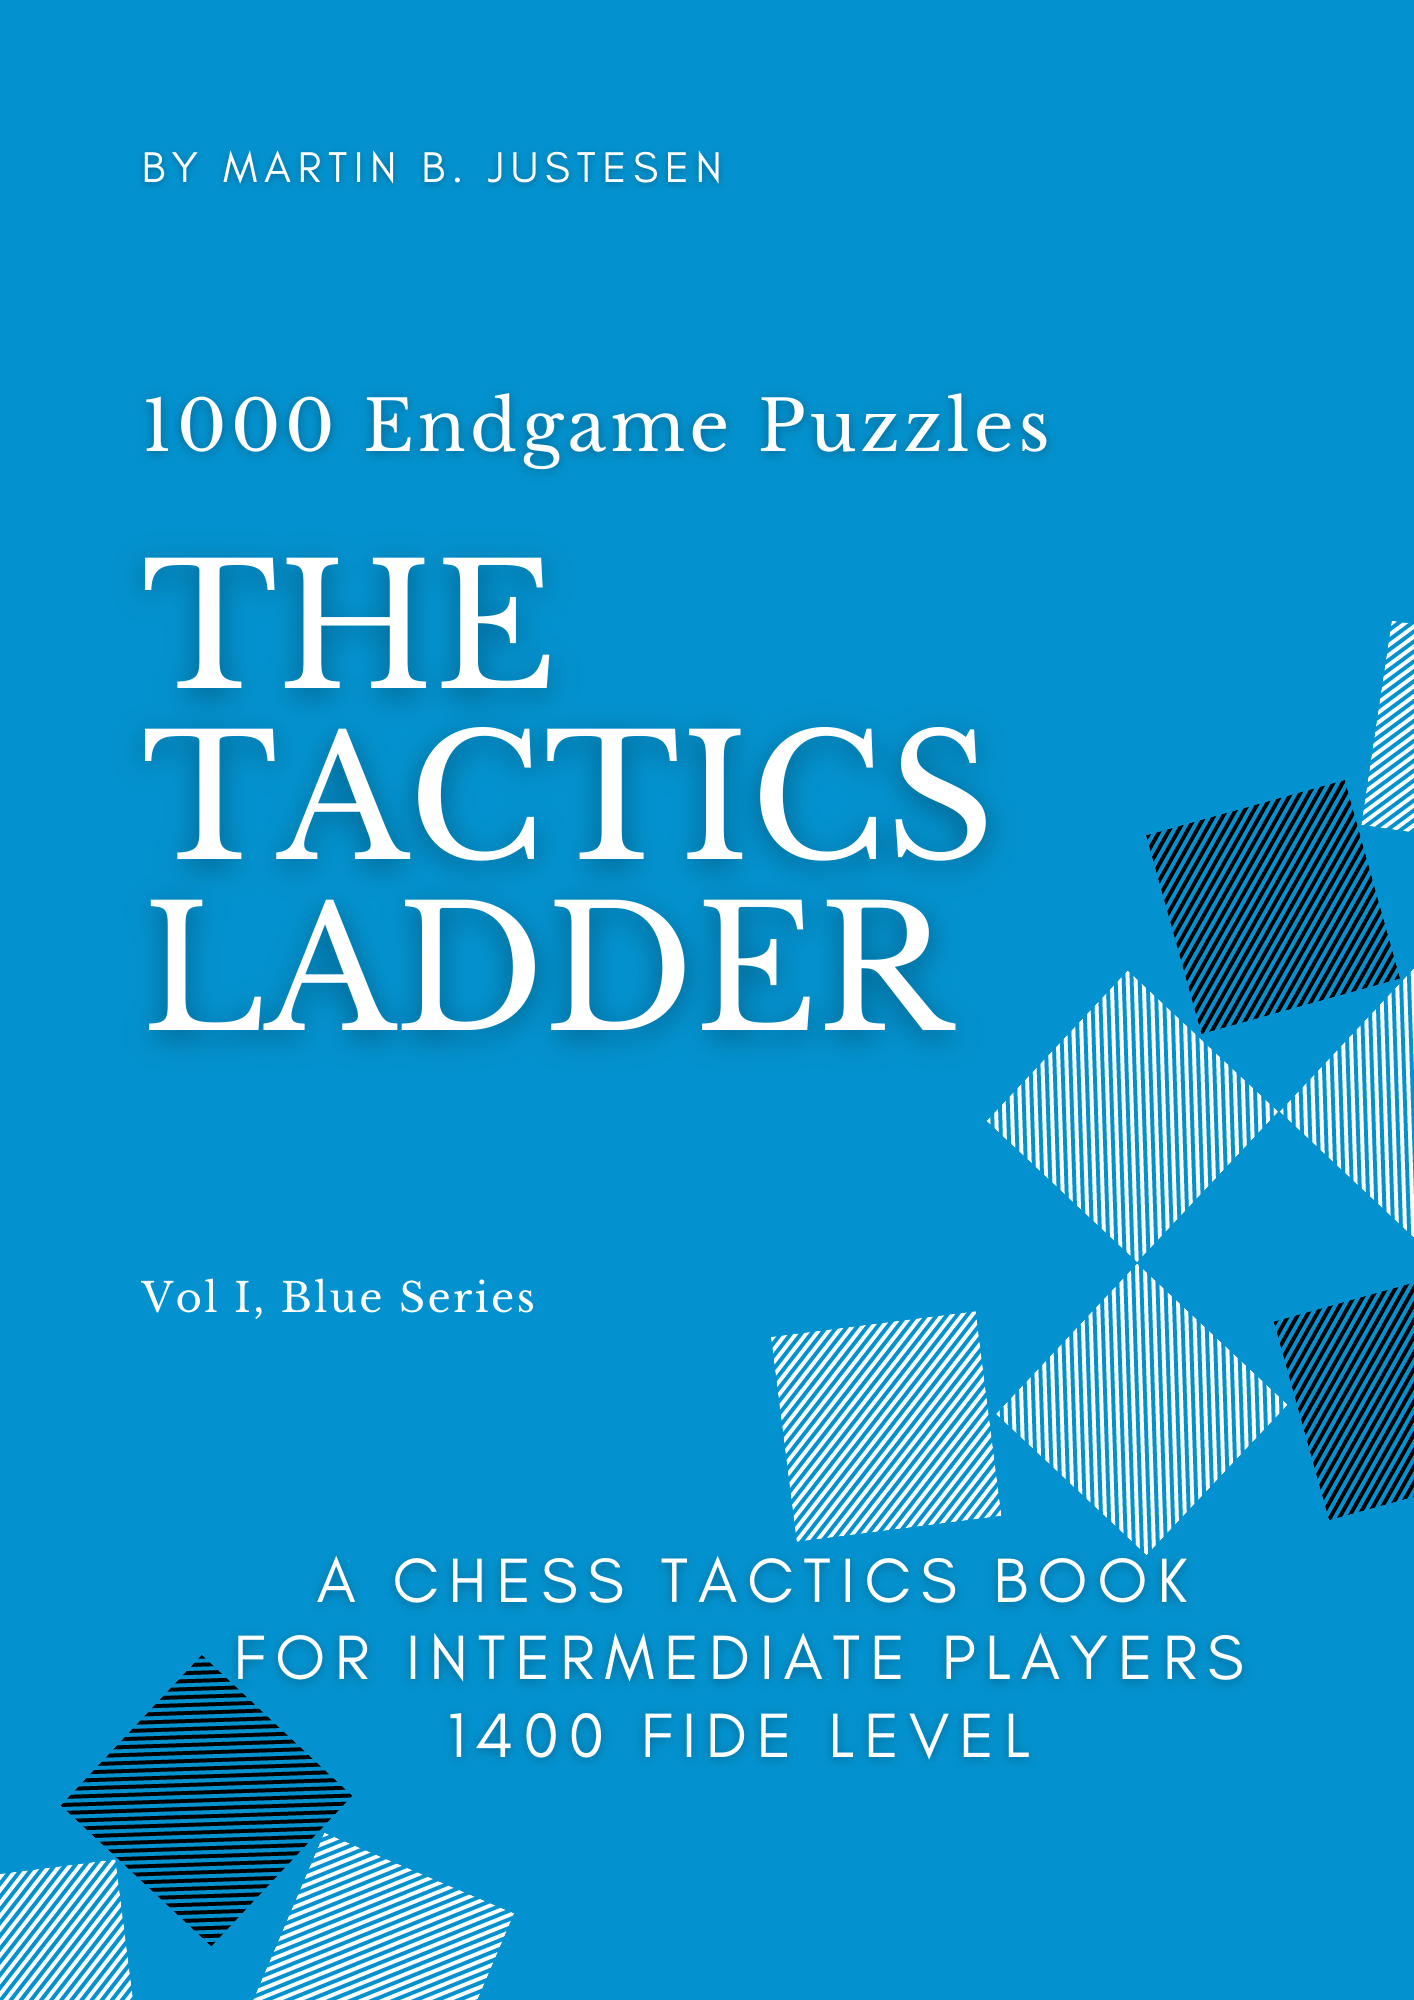 The Tactics Ladder - A 16.000 Puzzle Project (Free pdf-Preview)